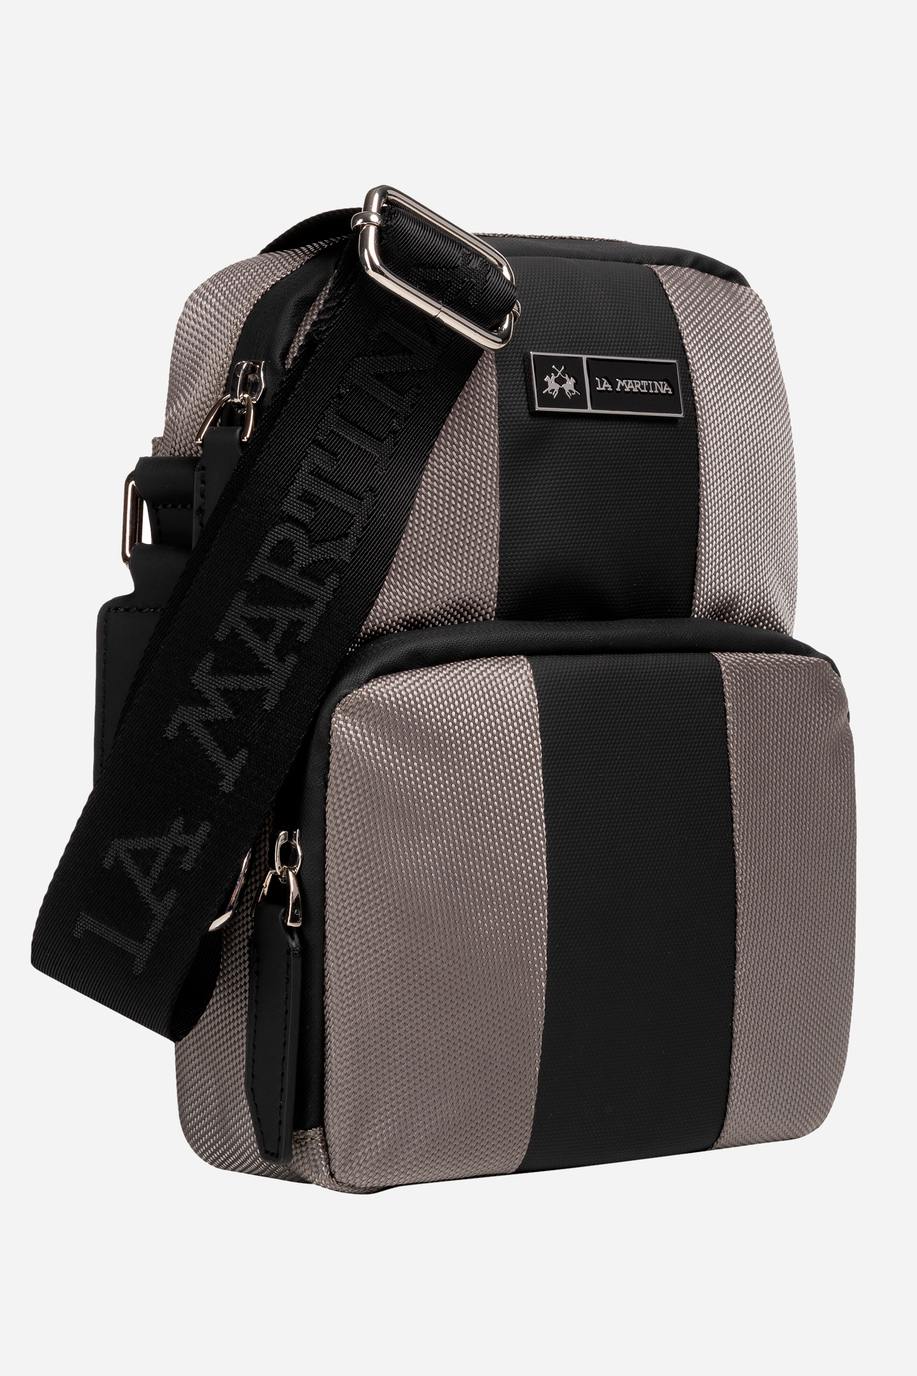 Polyester crossbody bag with a polyester webbing strap - Accessories | La Martina - Official Online Shop